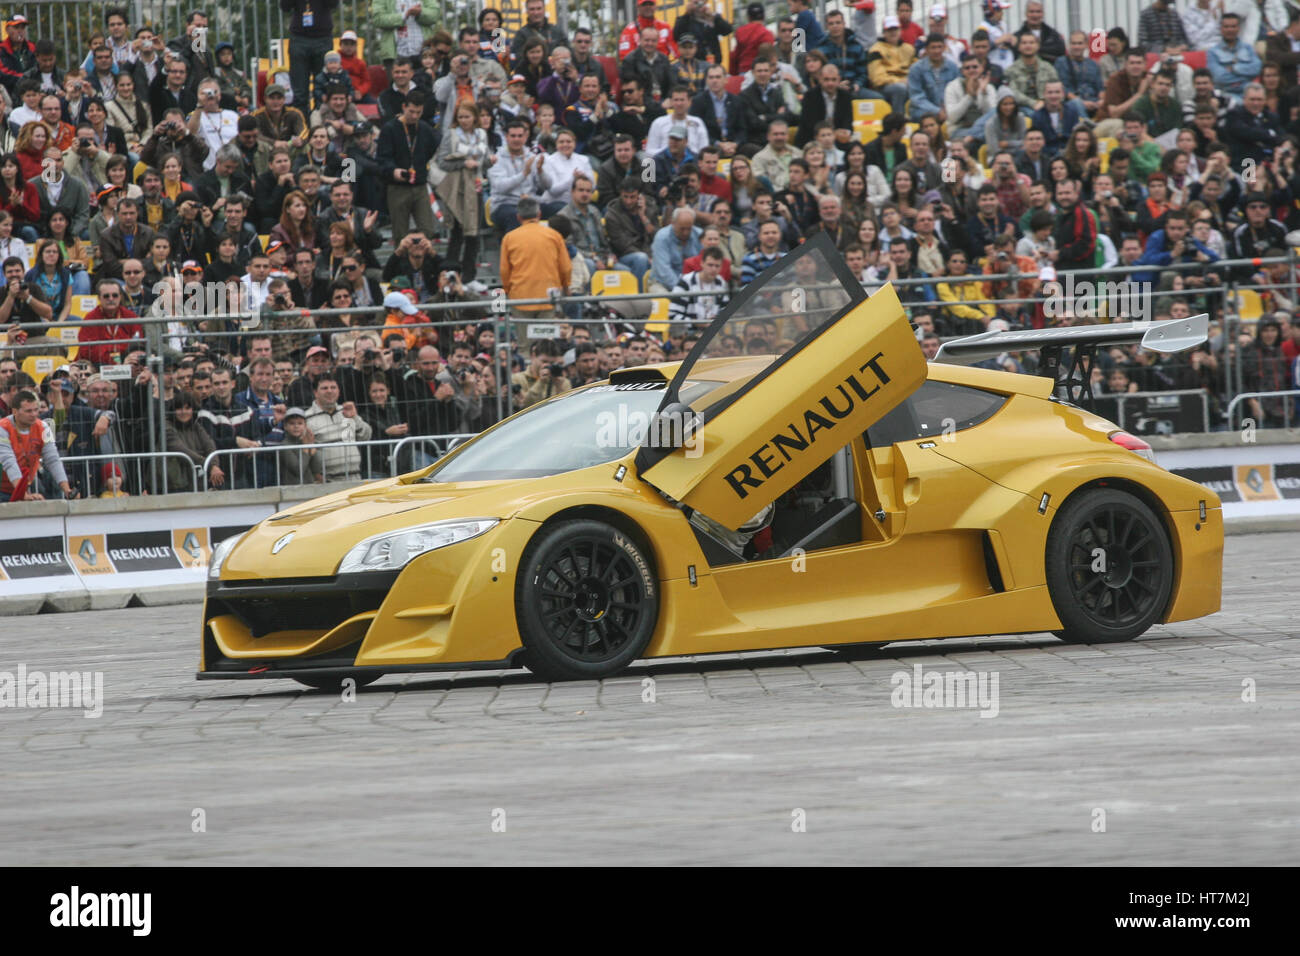 Bucharest, Romania, October 10, 2009: A Renault racing car takes a driving demonstration on the occasion of Renault Road show held in Bucharest. Stock Photo